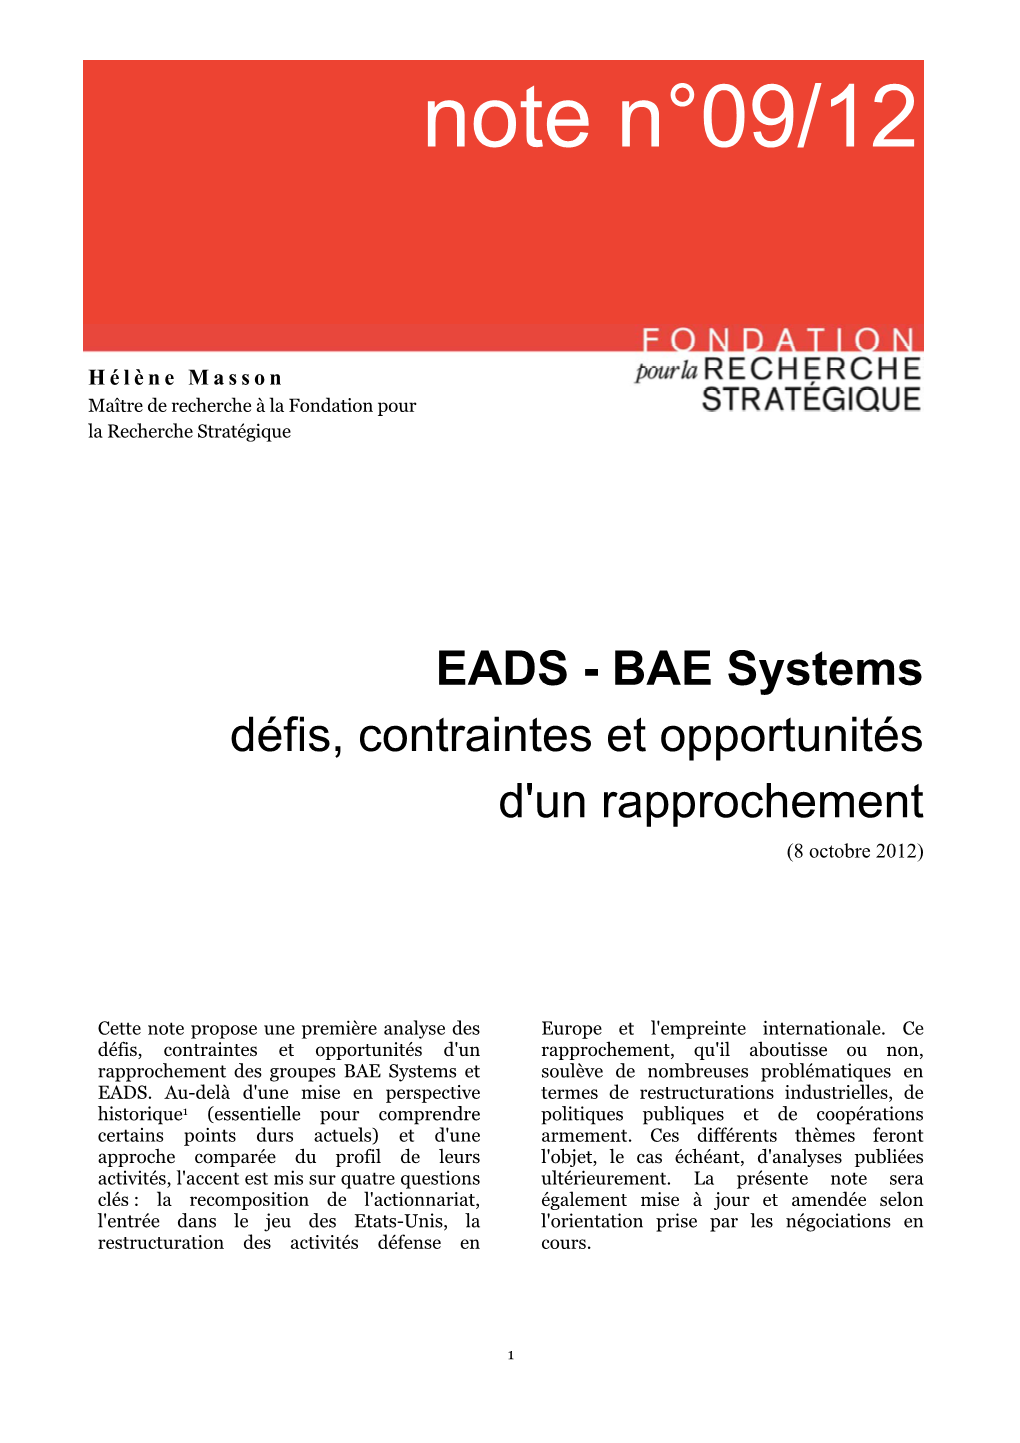 EADS - BAE Systems